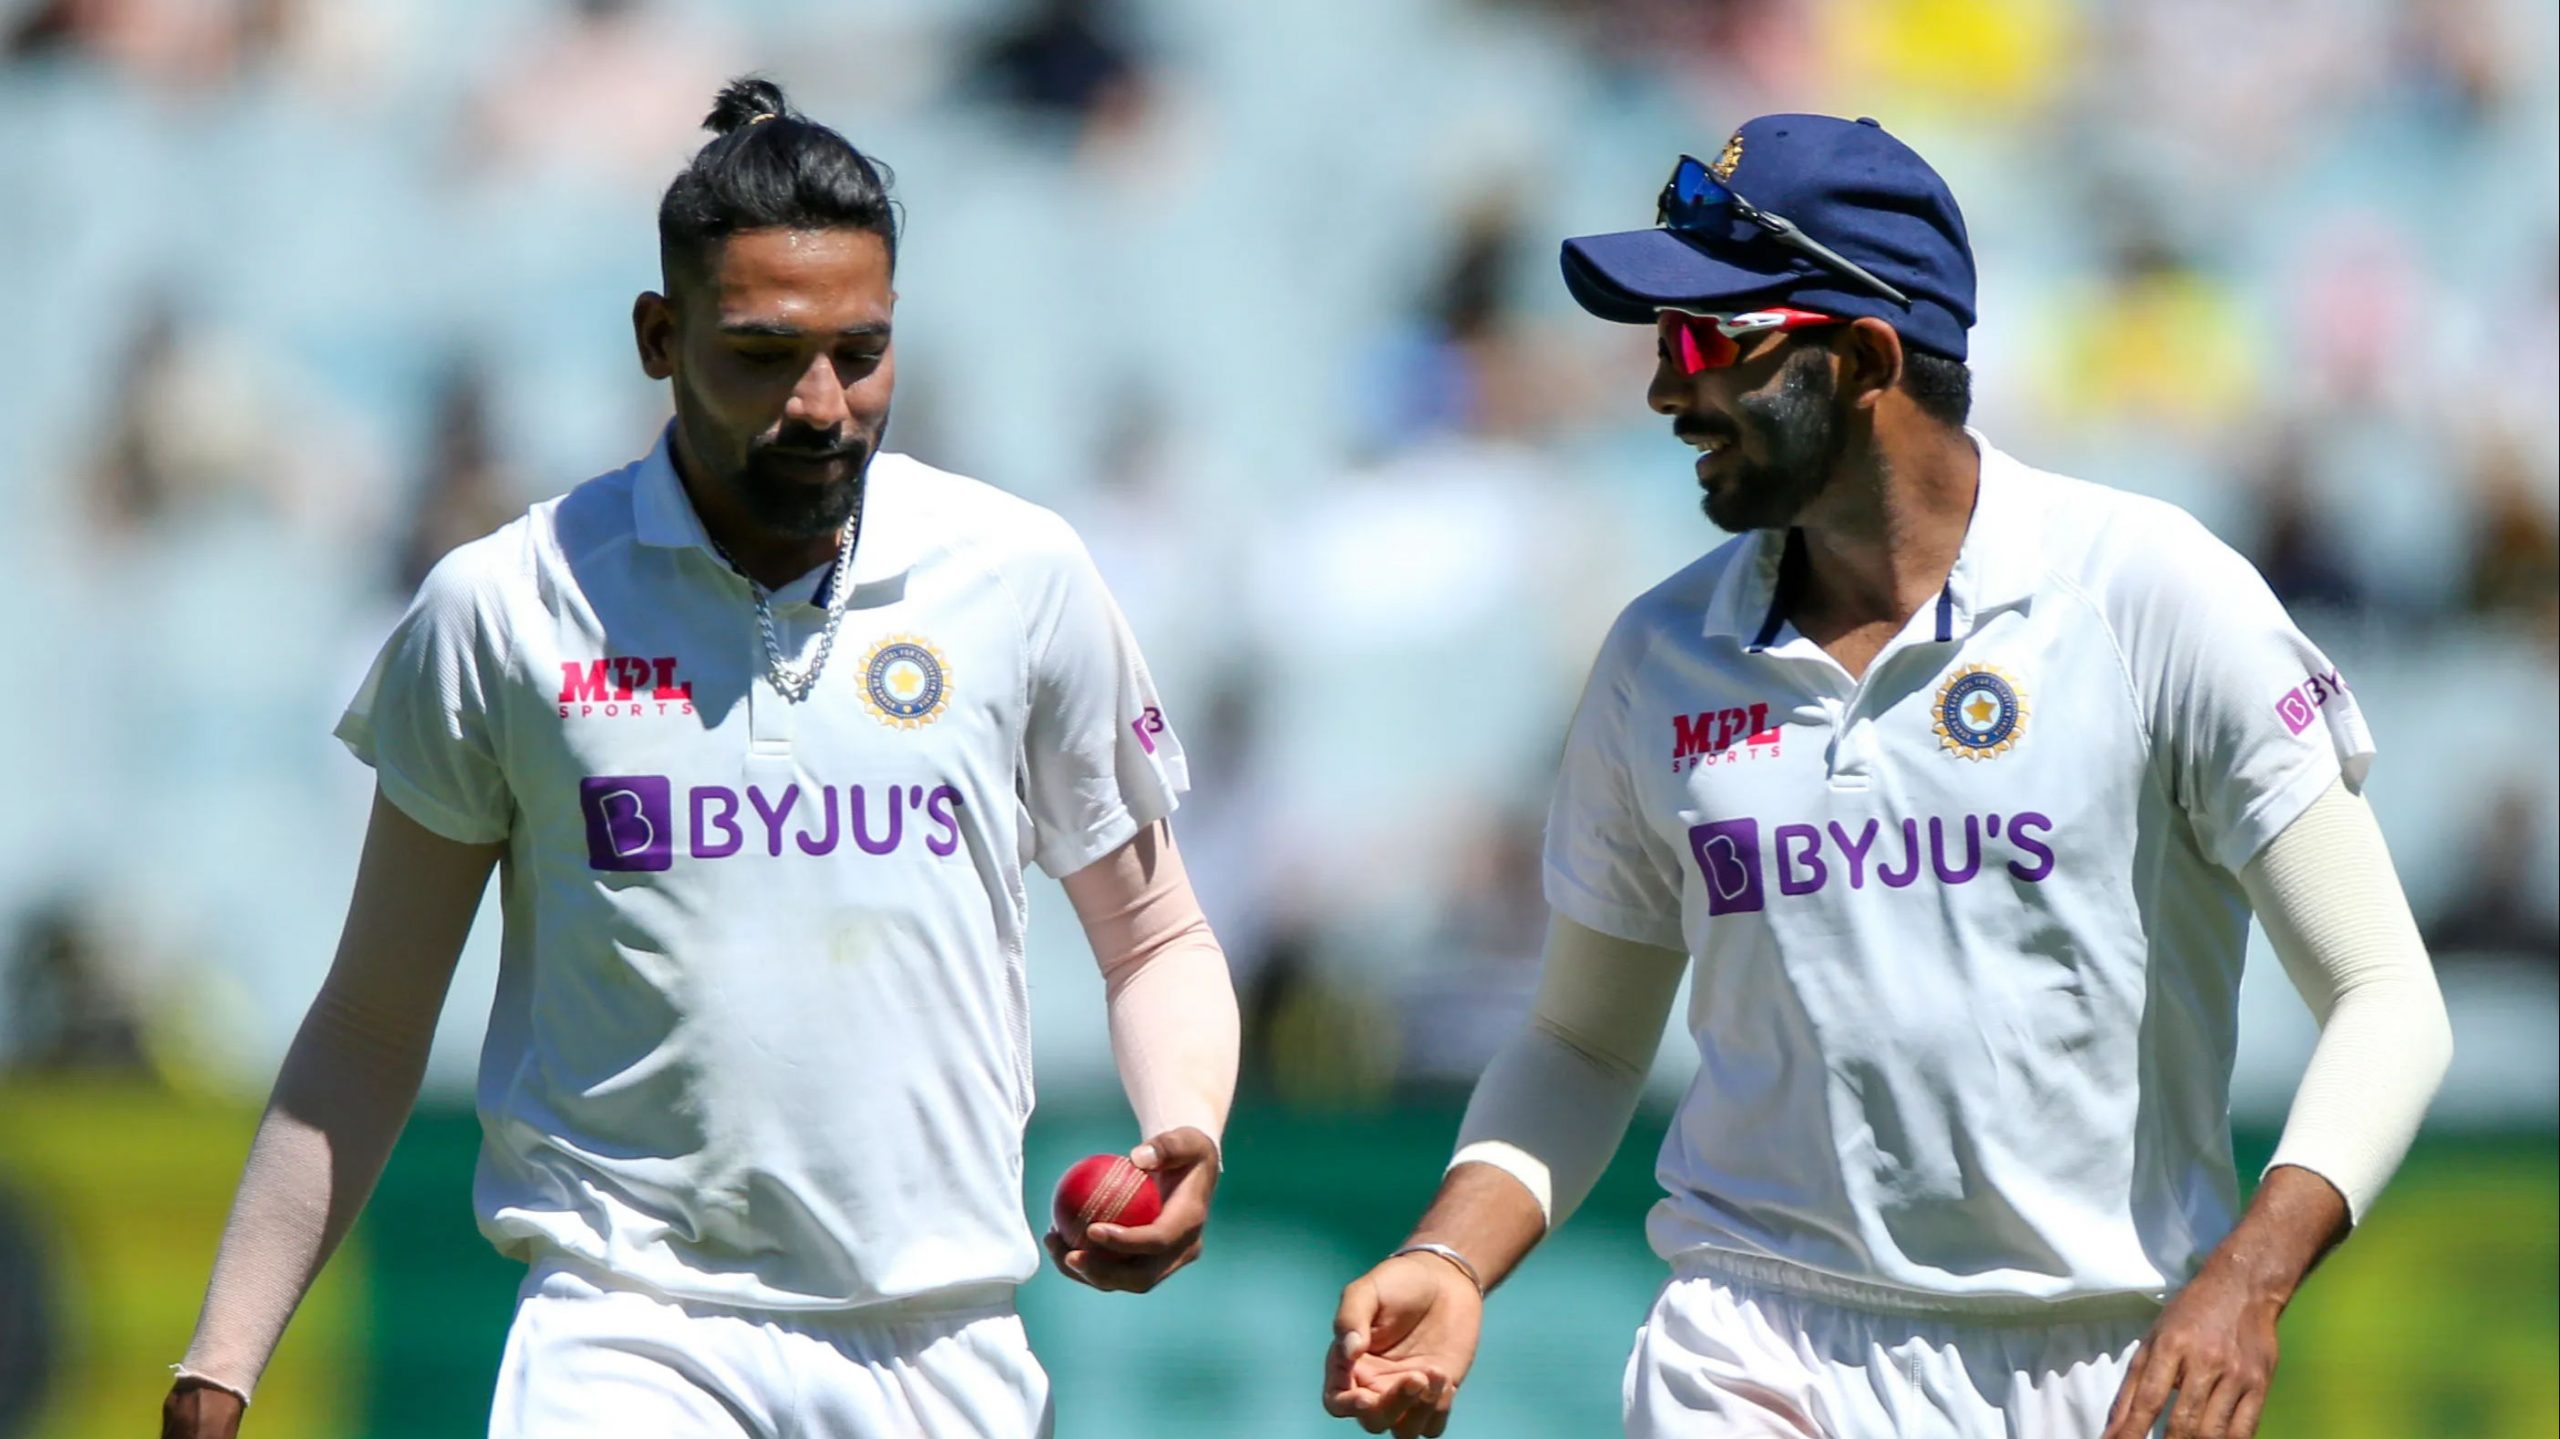 ICC starts investigation into racist abuse of Indian players in Sydney